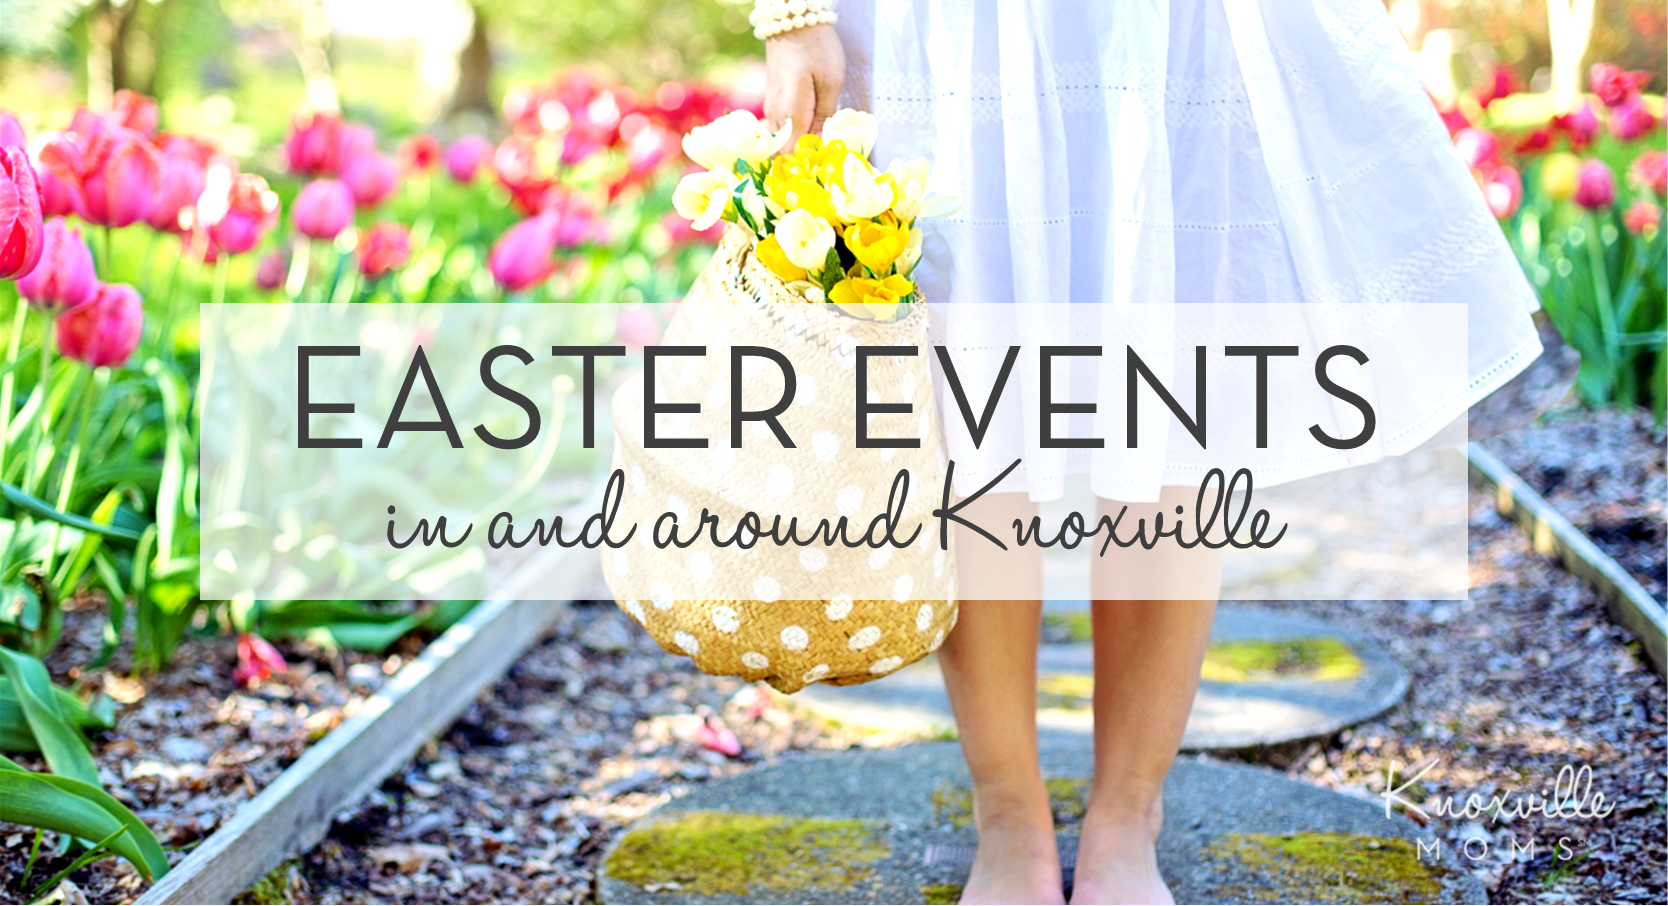 2021 Knoxville Easter Events